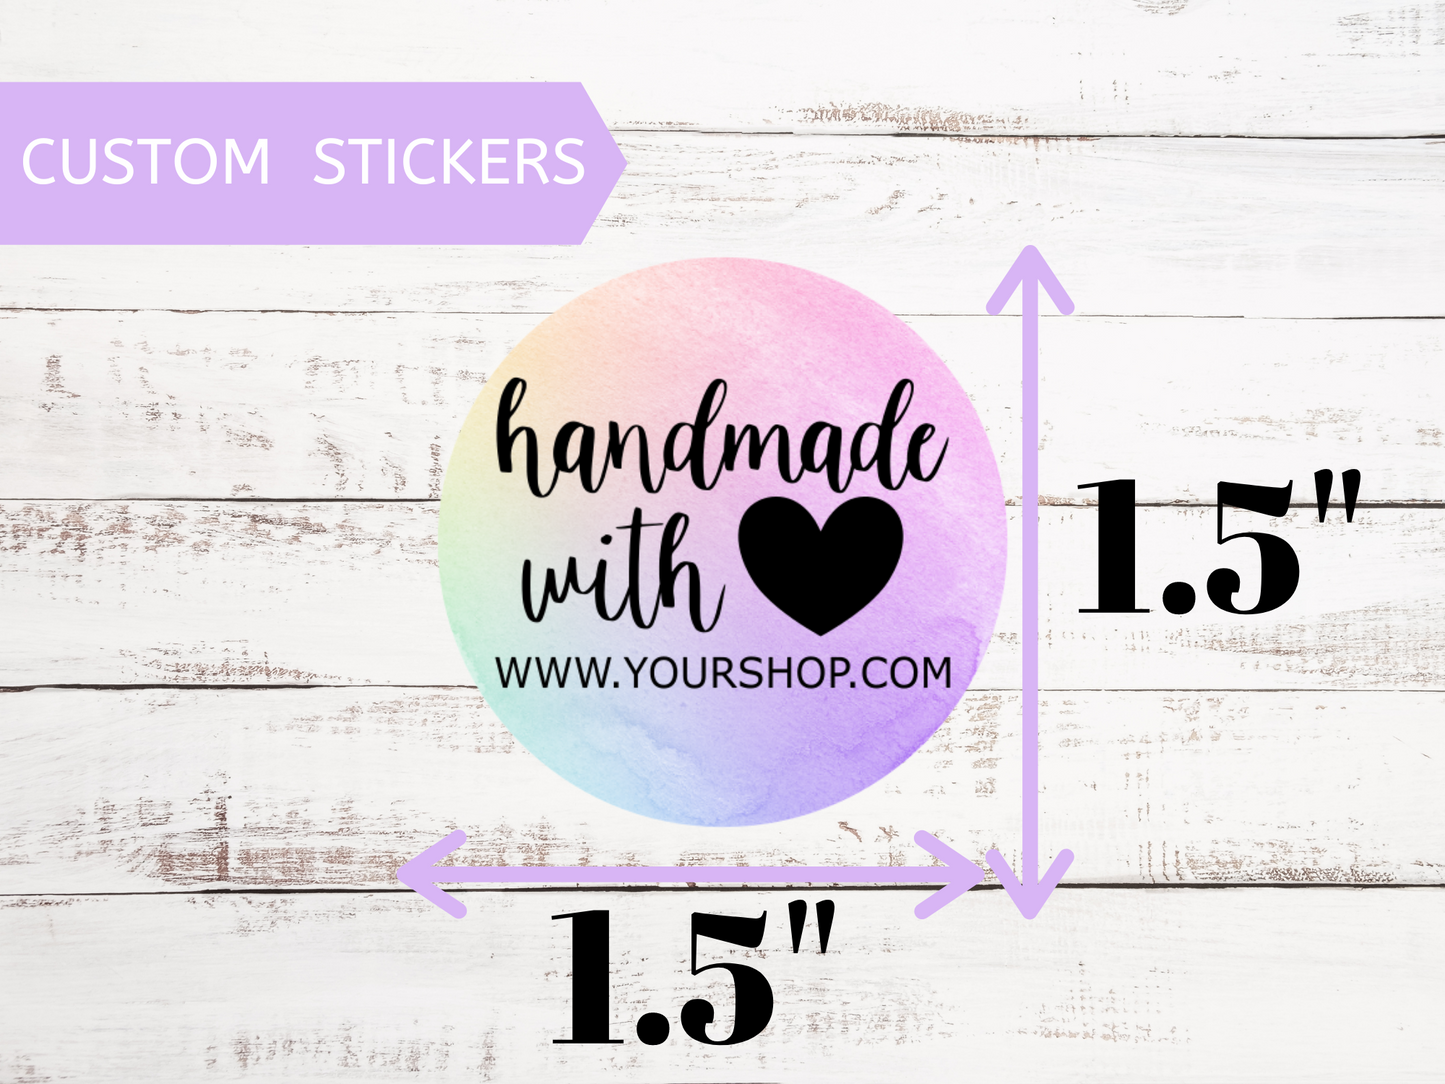 Handmade With Love Custom Stickers, Cute Watercolor Pastel Shop Stickers, Custom Website Stickers, Personalized Stickers for Shop Owners